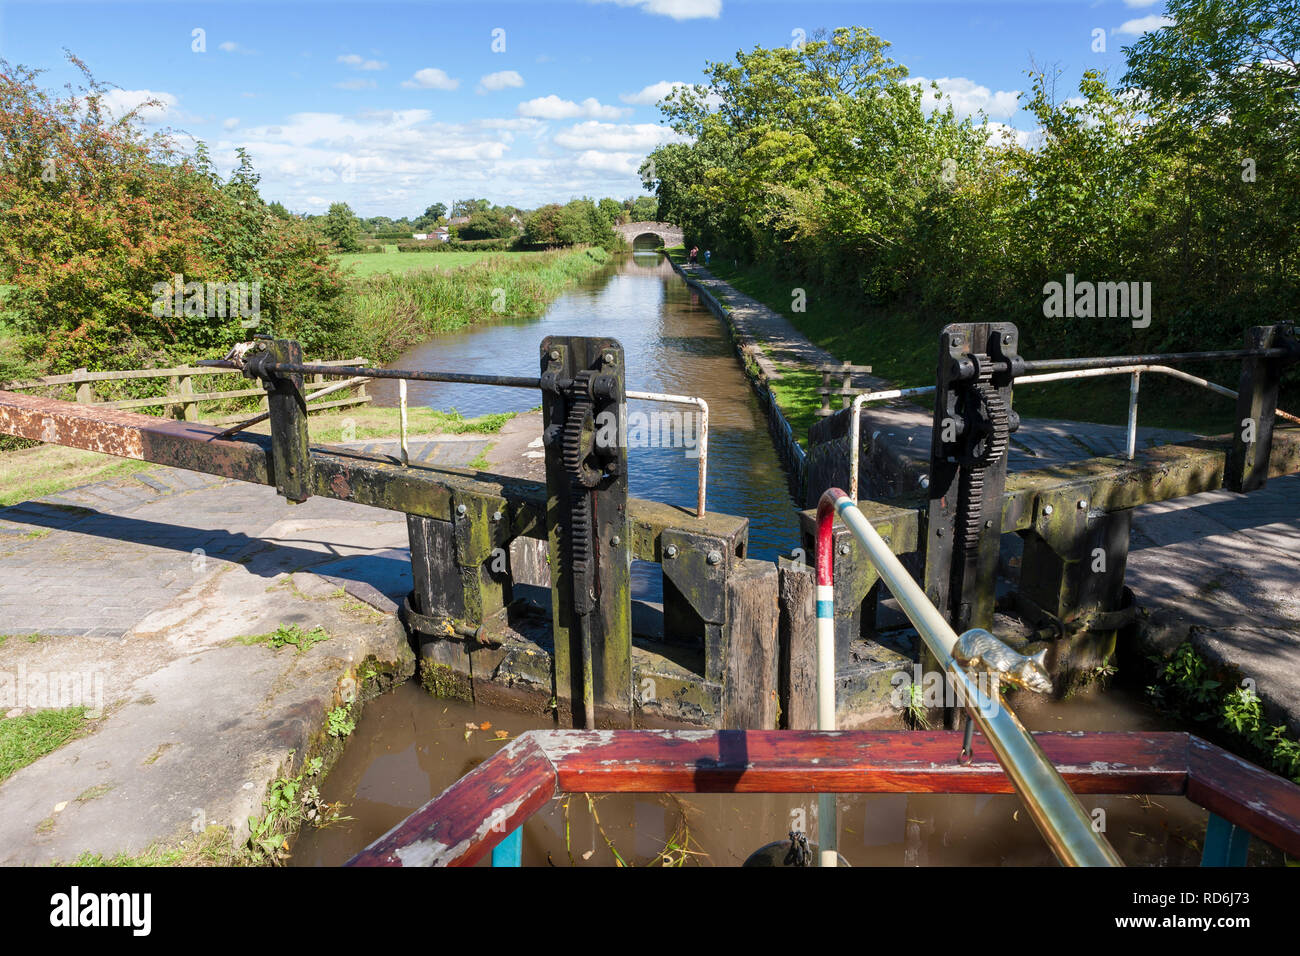 A narrowboat in Swanley No. 1 lock, Llangollen Canal, Cheshire, England, UK Stock Photo